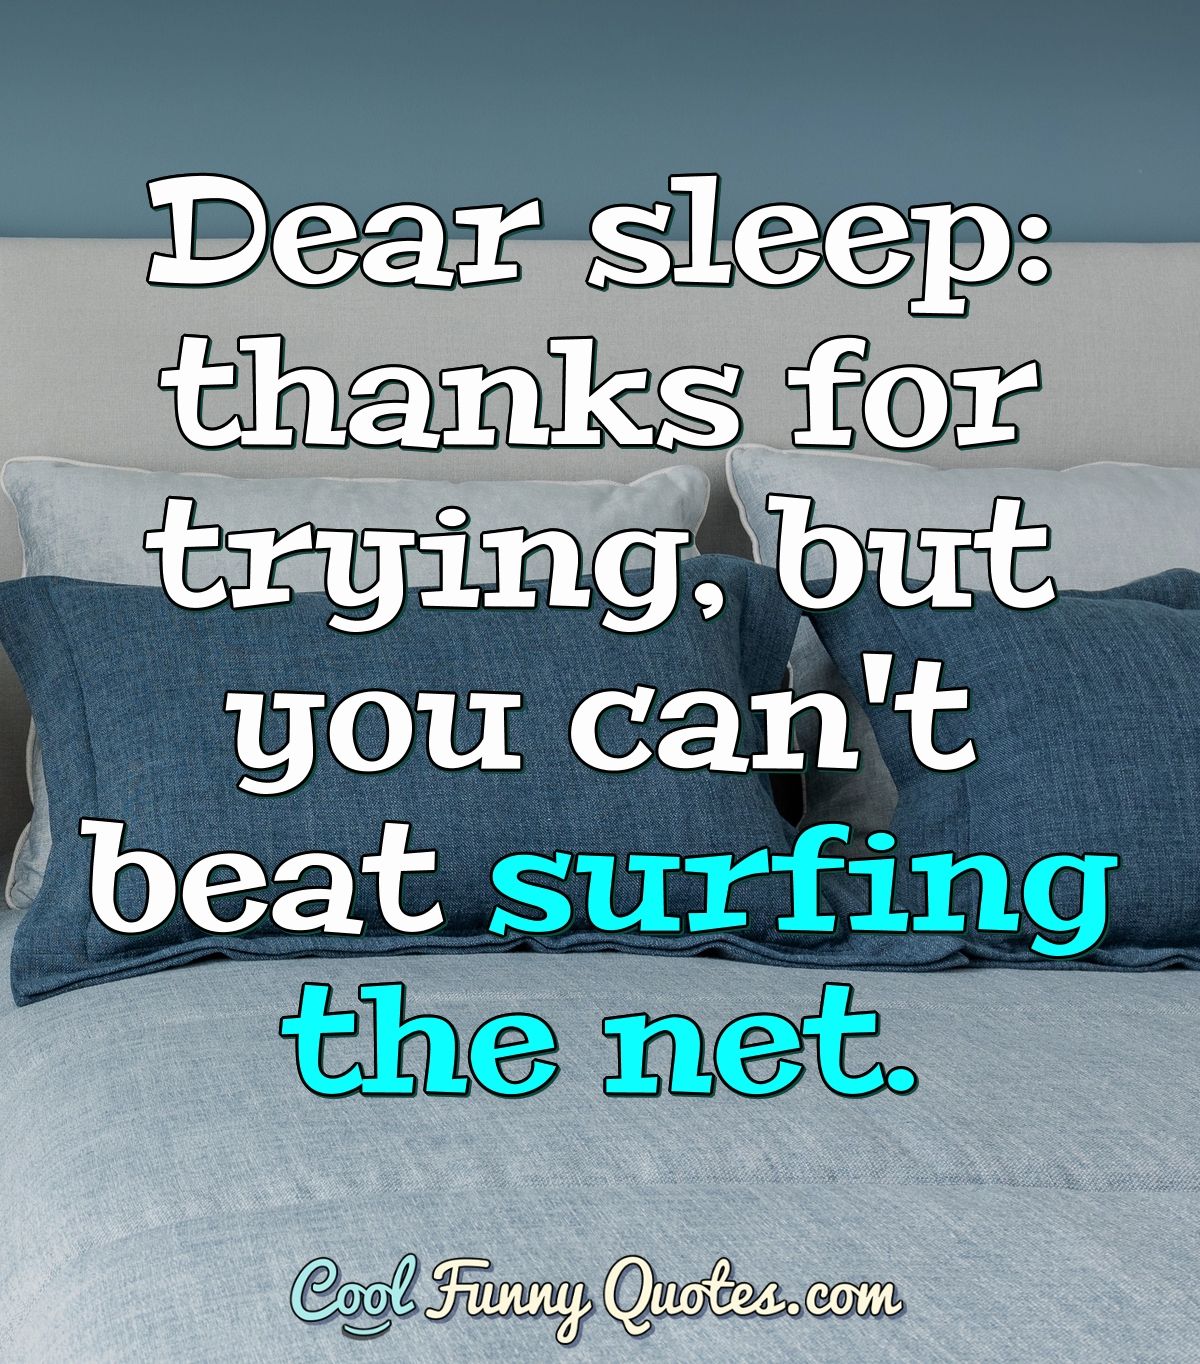 Dear sleep: thanks for trying, but you can't beat surfing the net.